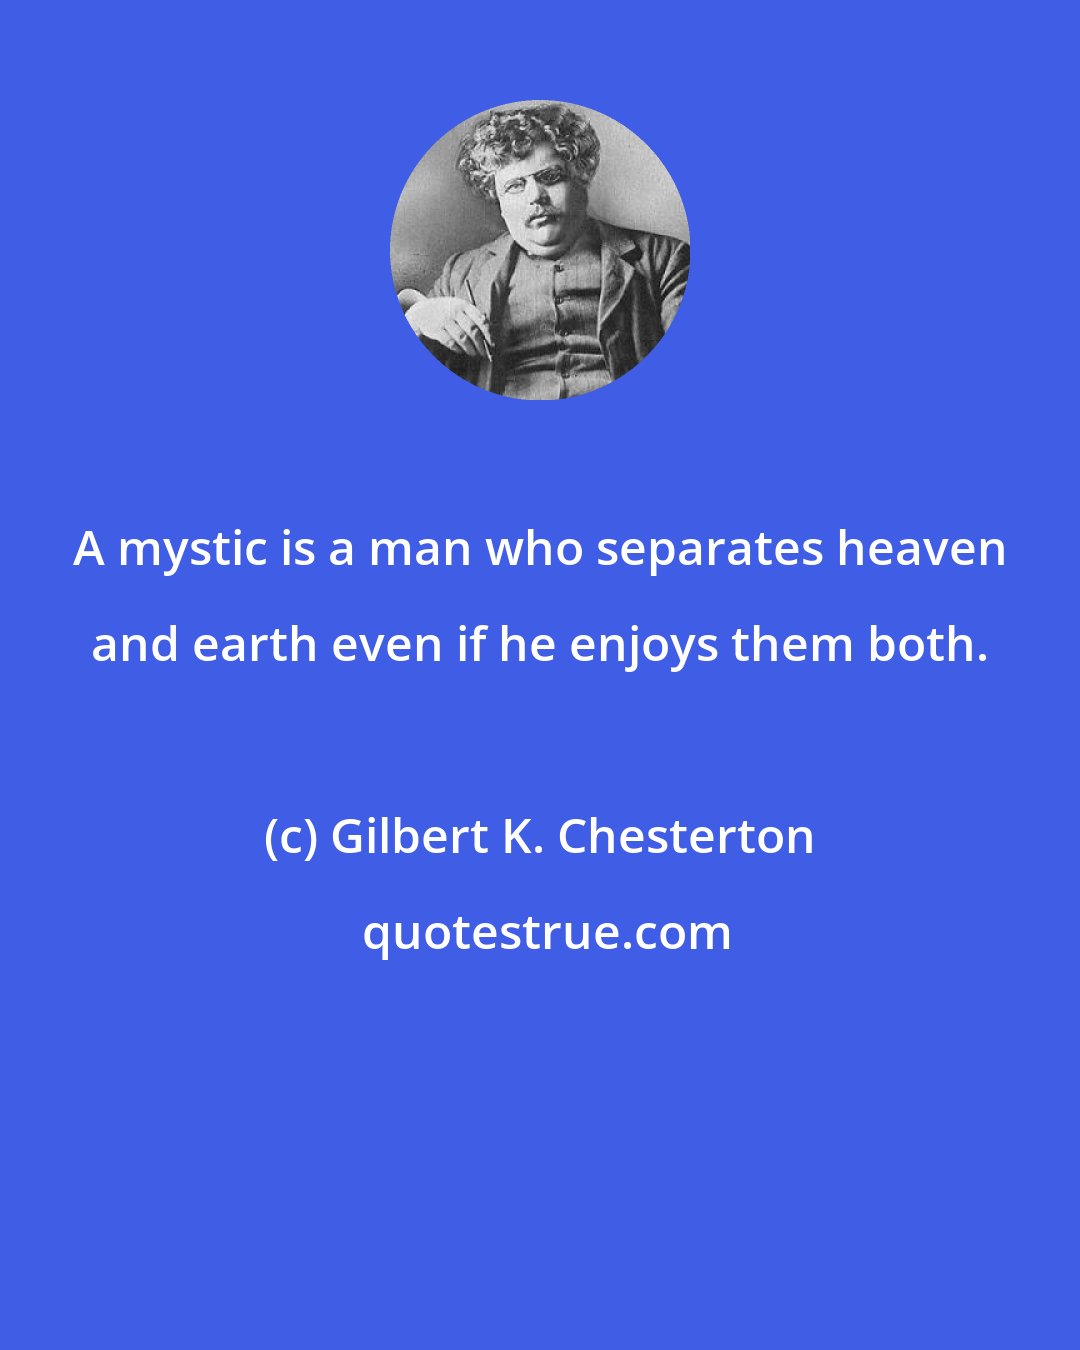 Gilbert K. Chesterton: A mystic is a man who separates heaven and earth even if he enjoys them both.